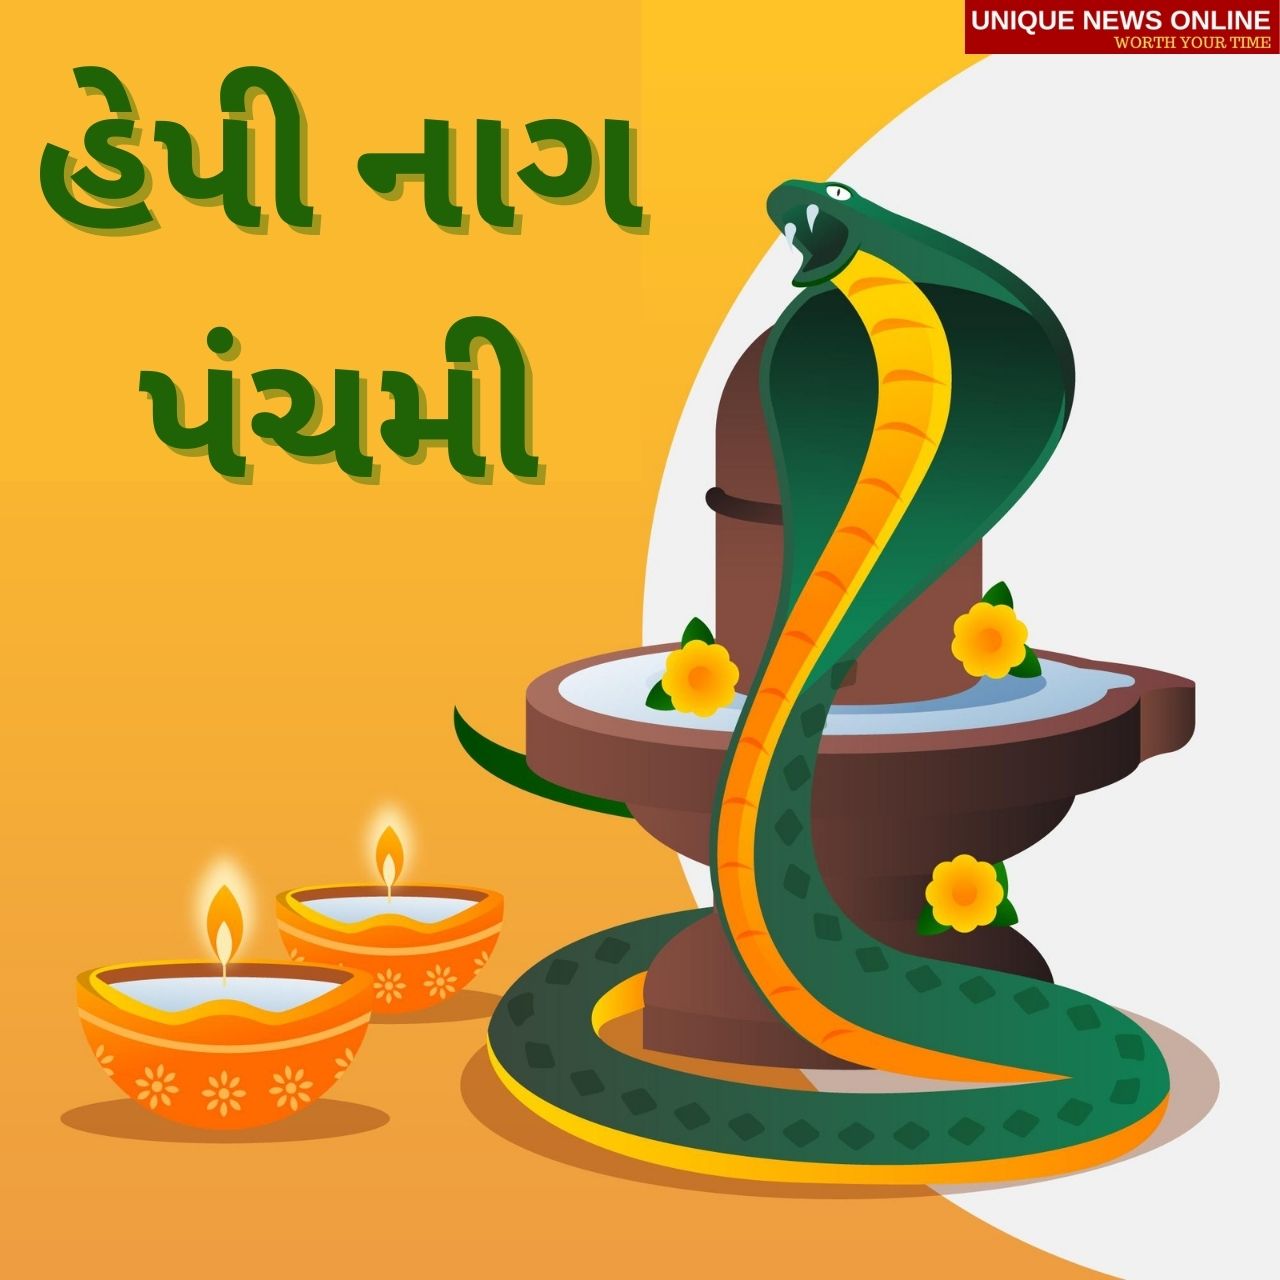 Nag Panchami 2021 Gujarati Wishes and Messages: Greetings, Poster, Stickers, Wallpaper, Messages, HD Images, and Quotes to send to your Loved Ones